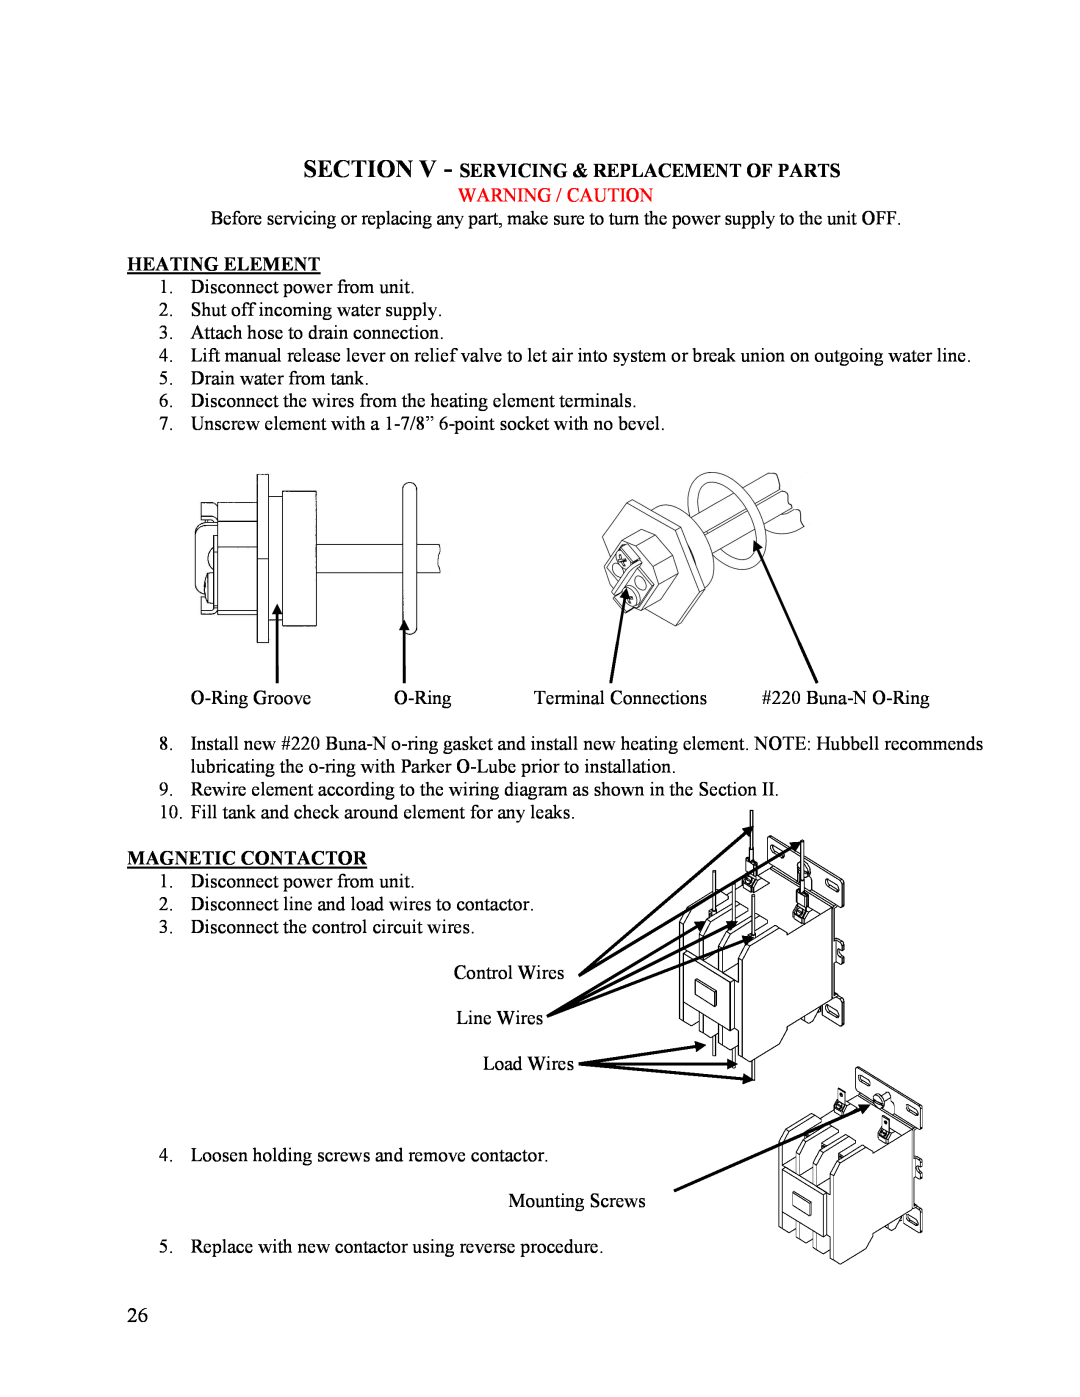 Hubbell Electric Heater Company J manual Section V - Servicing & Replacement Of Parts, Warning / Caution, Heating Element 